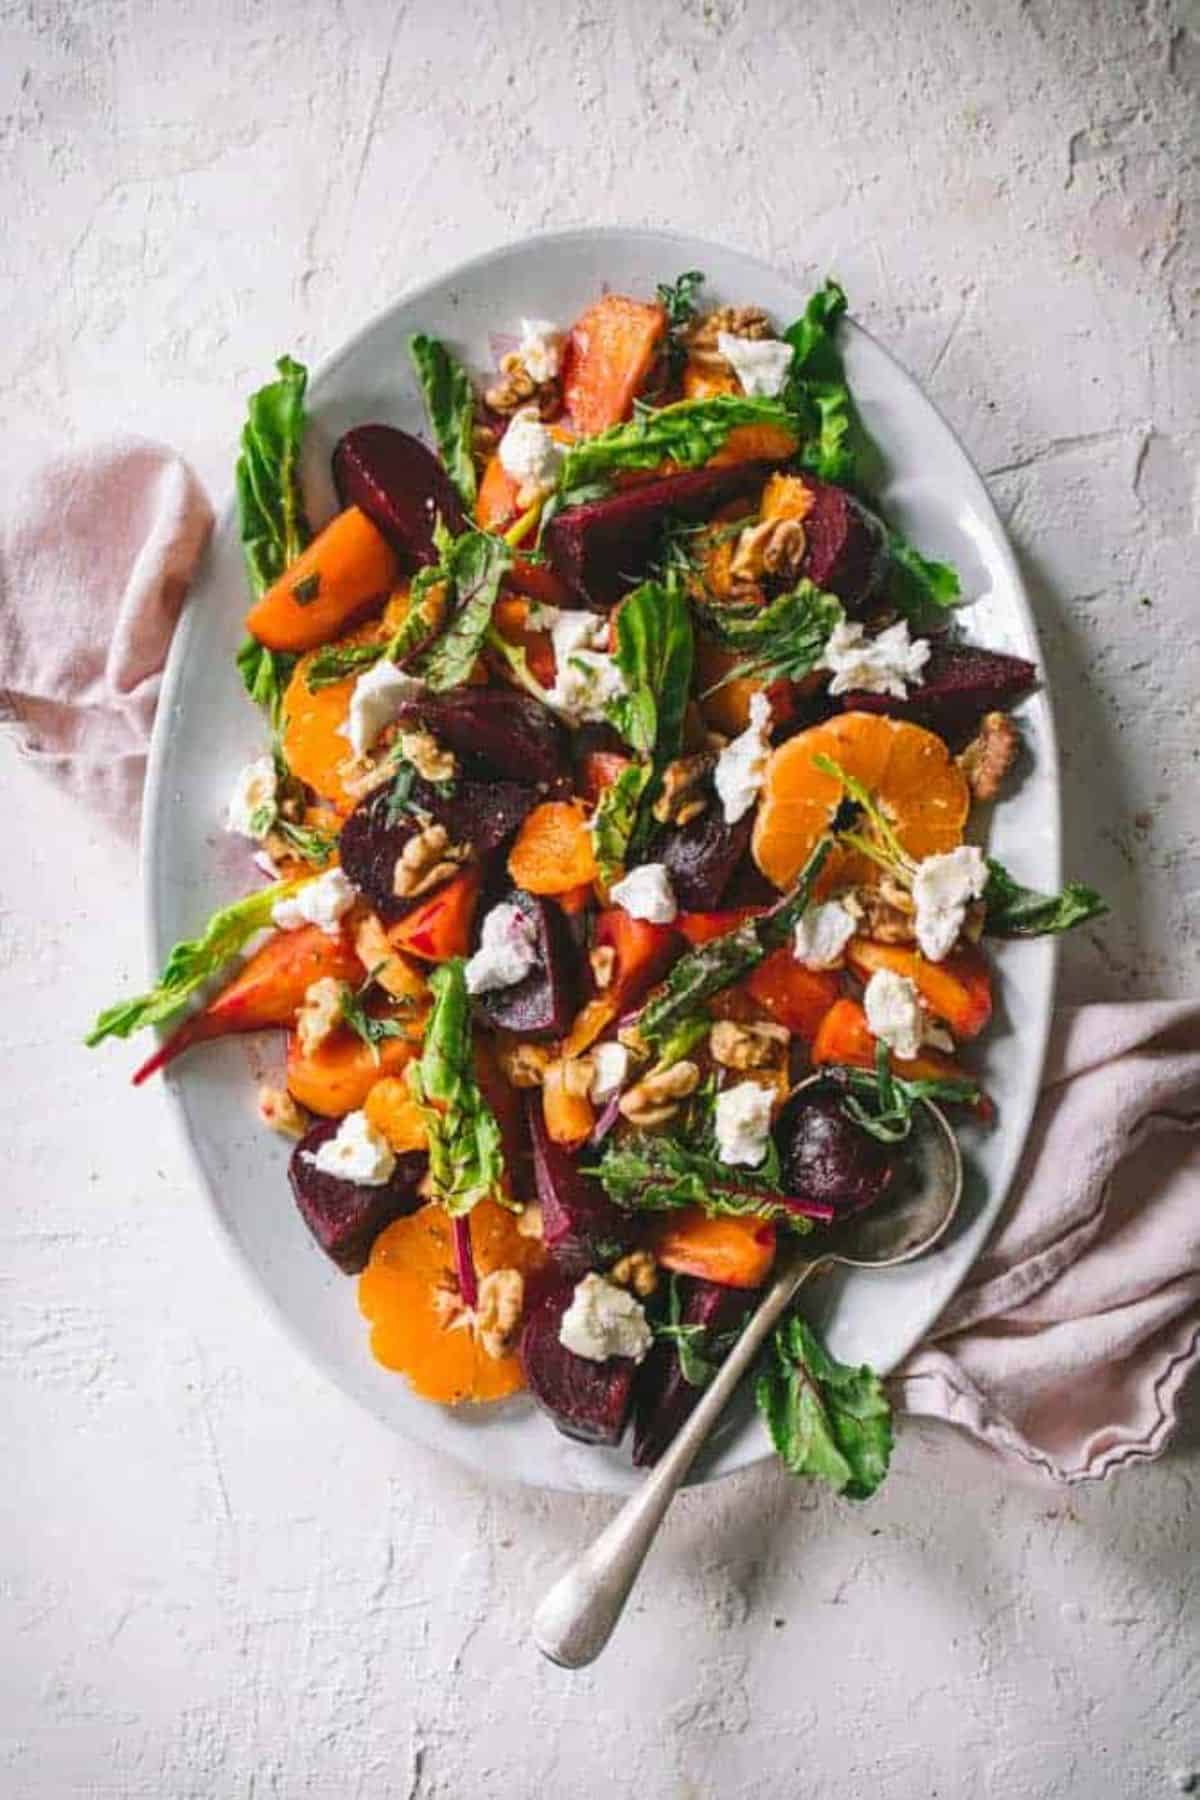 Delicious Beet Salad With Citrus Tarragon Dressing on a white tray.